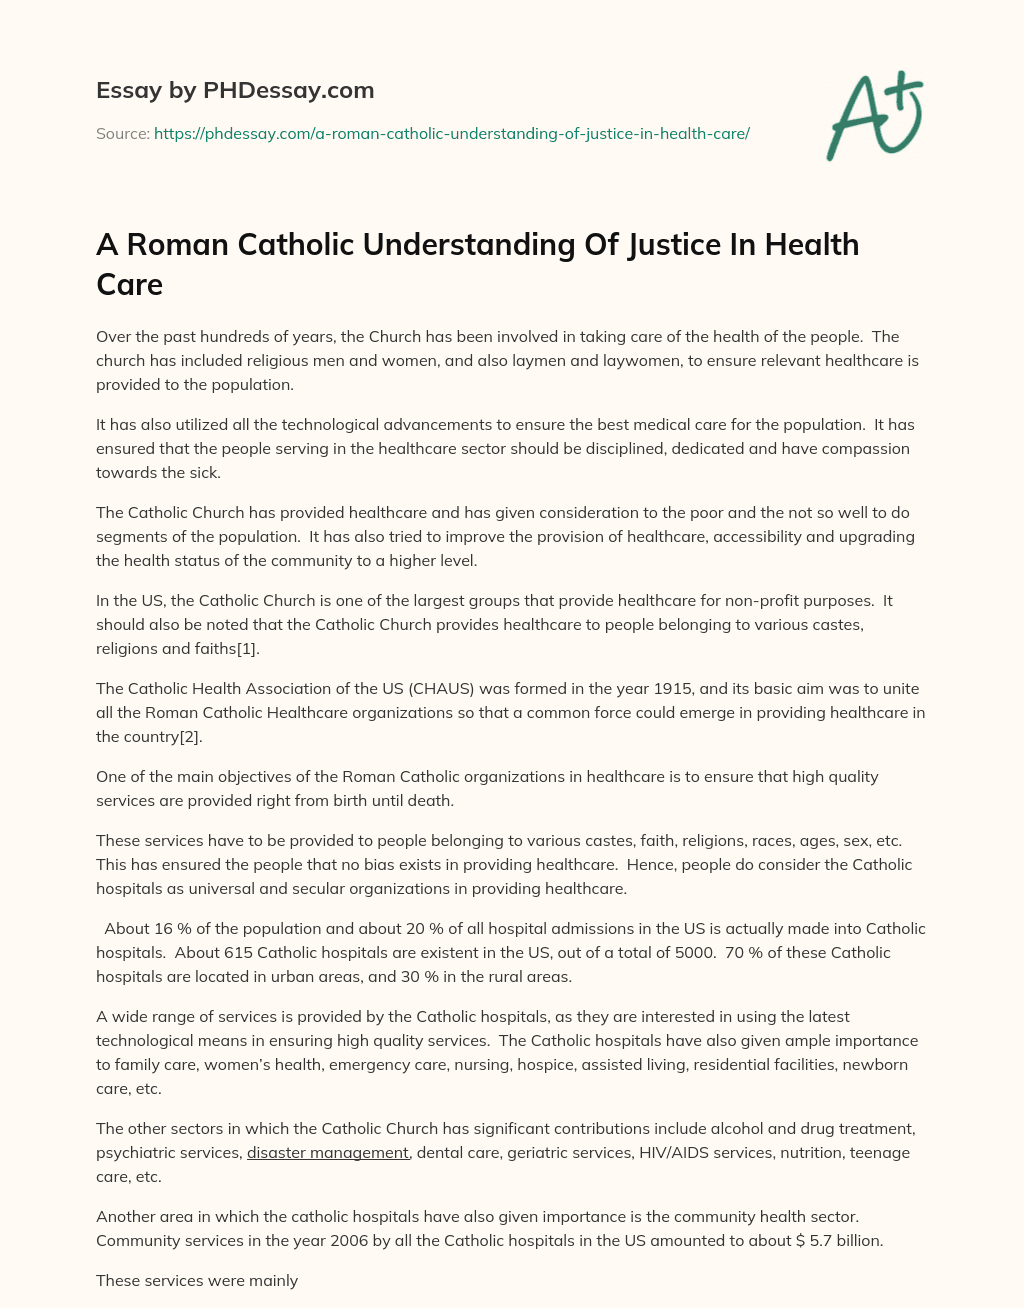 A Roman Catholic Understanding Of Justice In Health Care essay